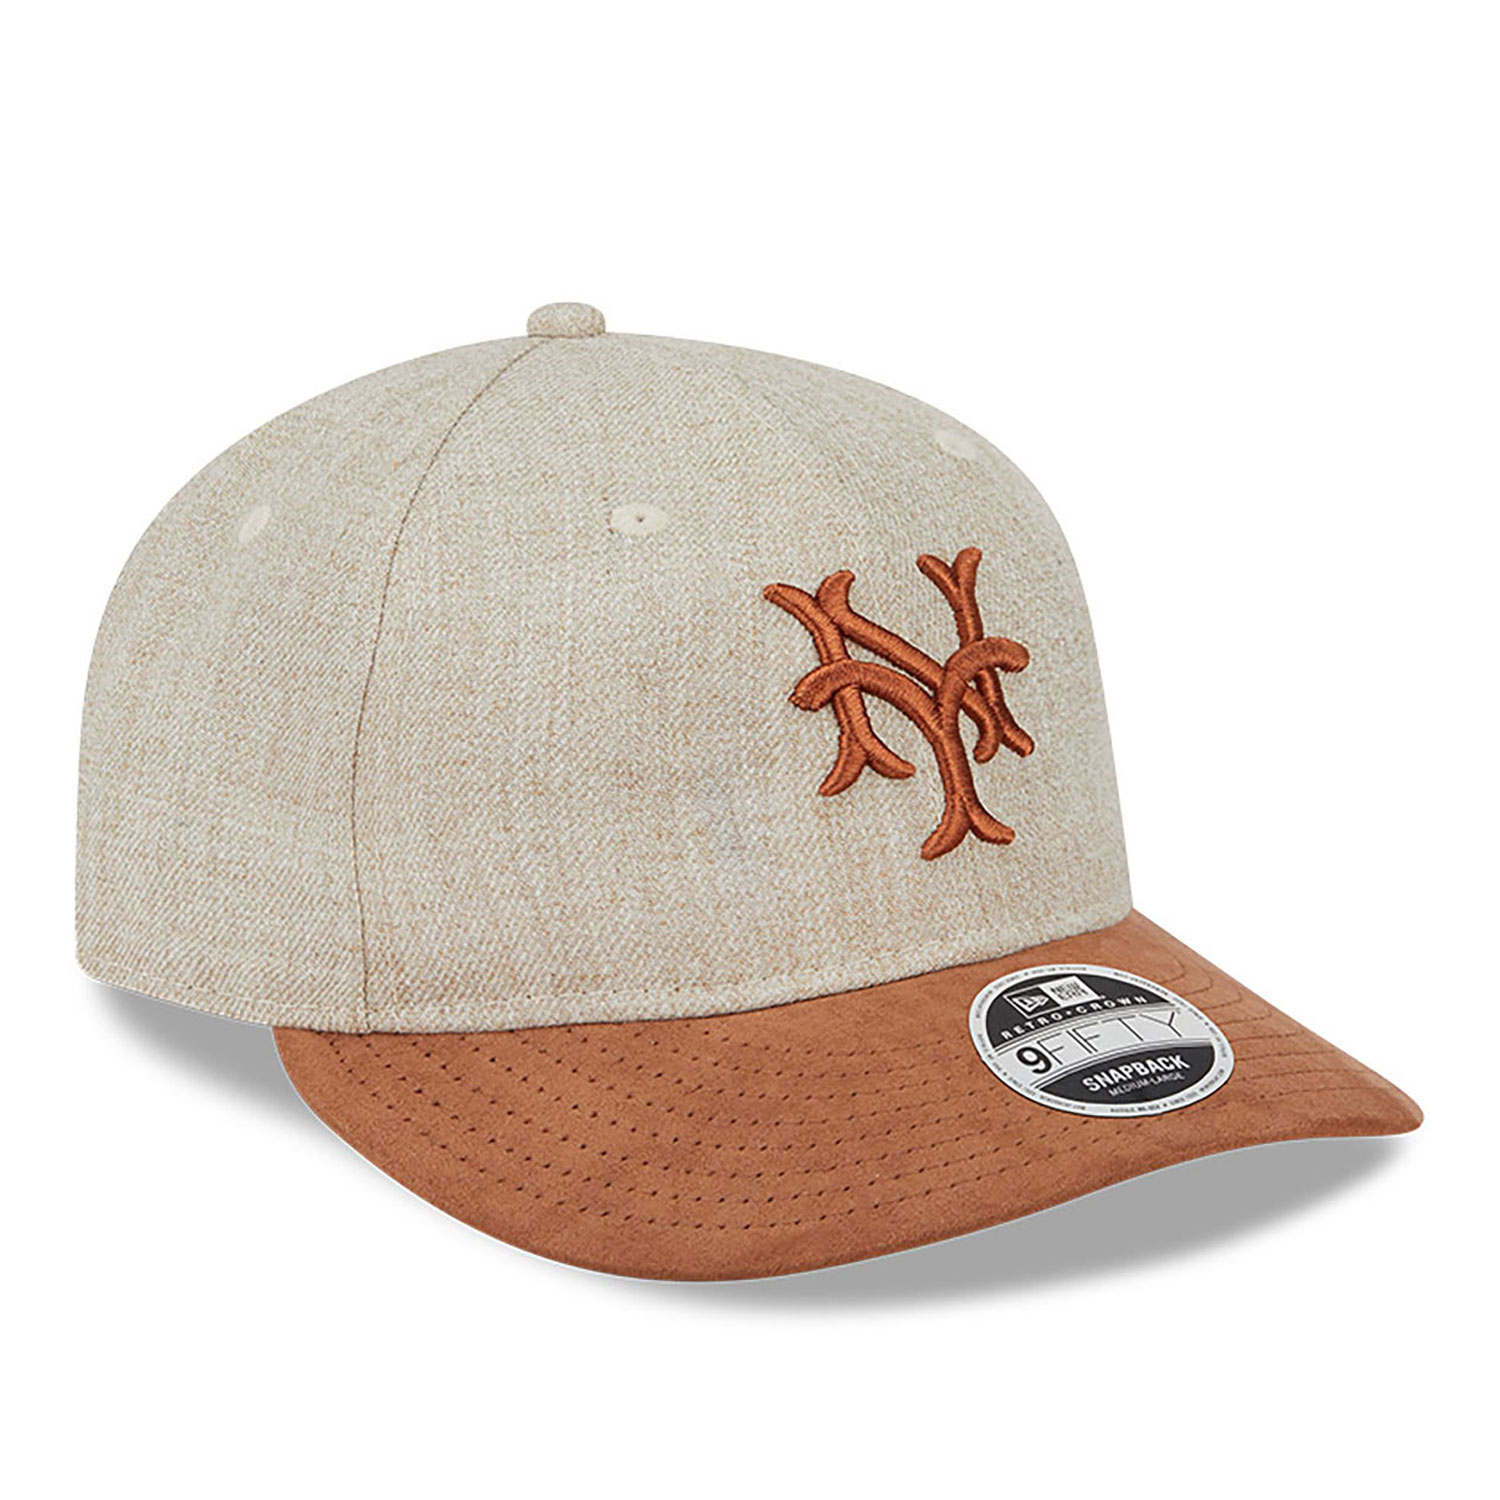 New York Mets MLB Two Tone Brown Retro Crown 9FIFTY Snapback Cap